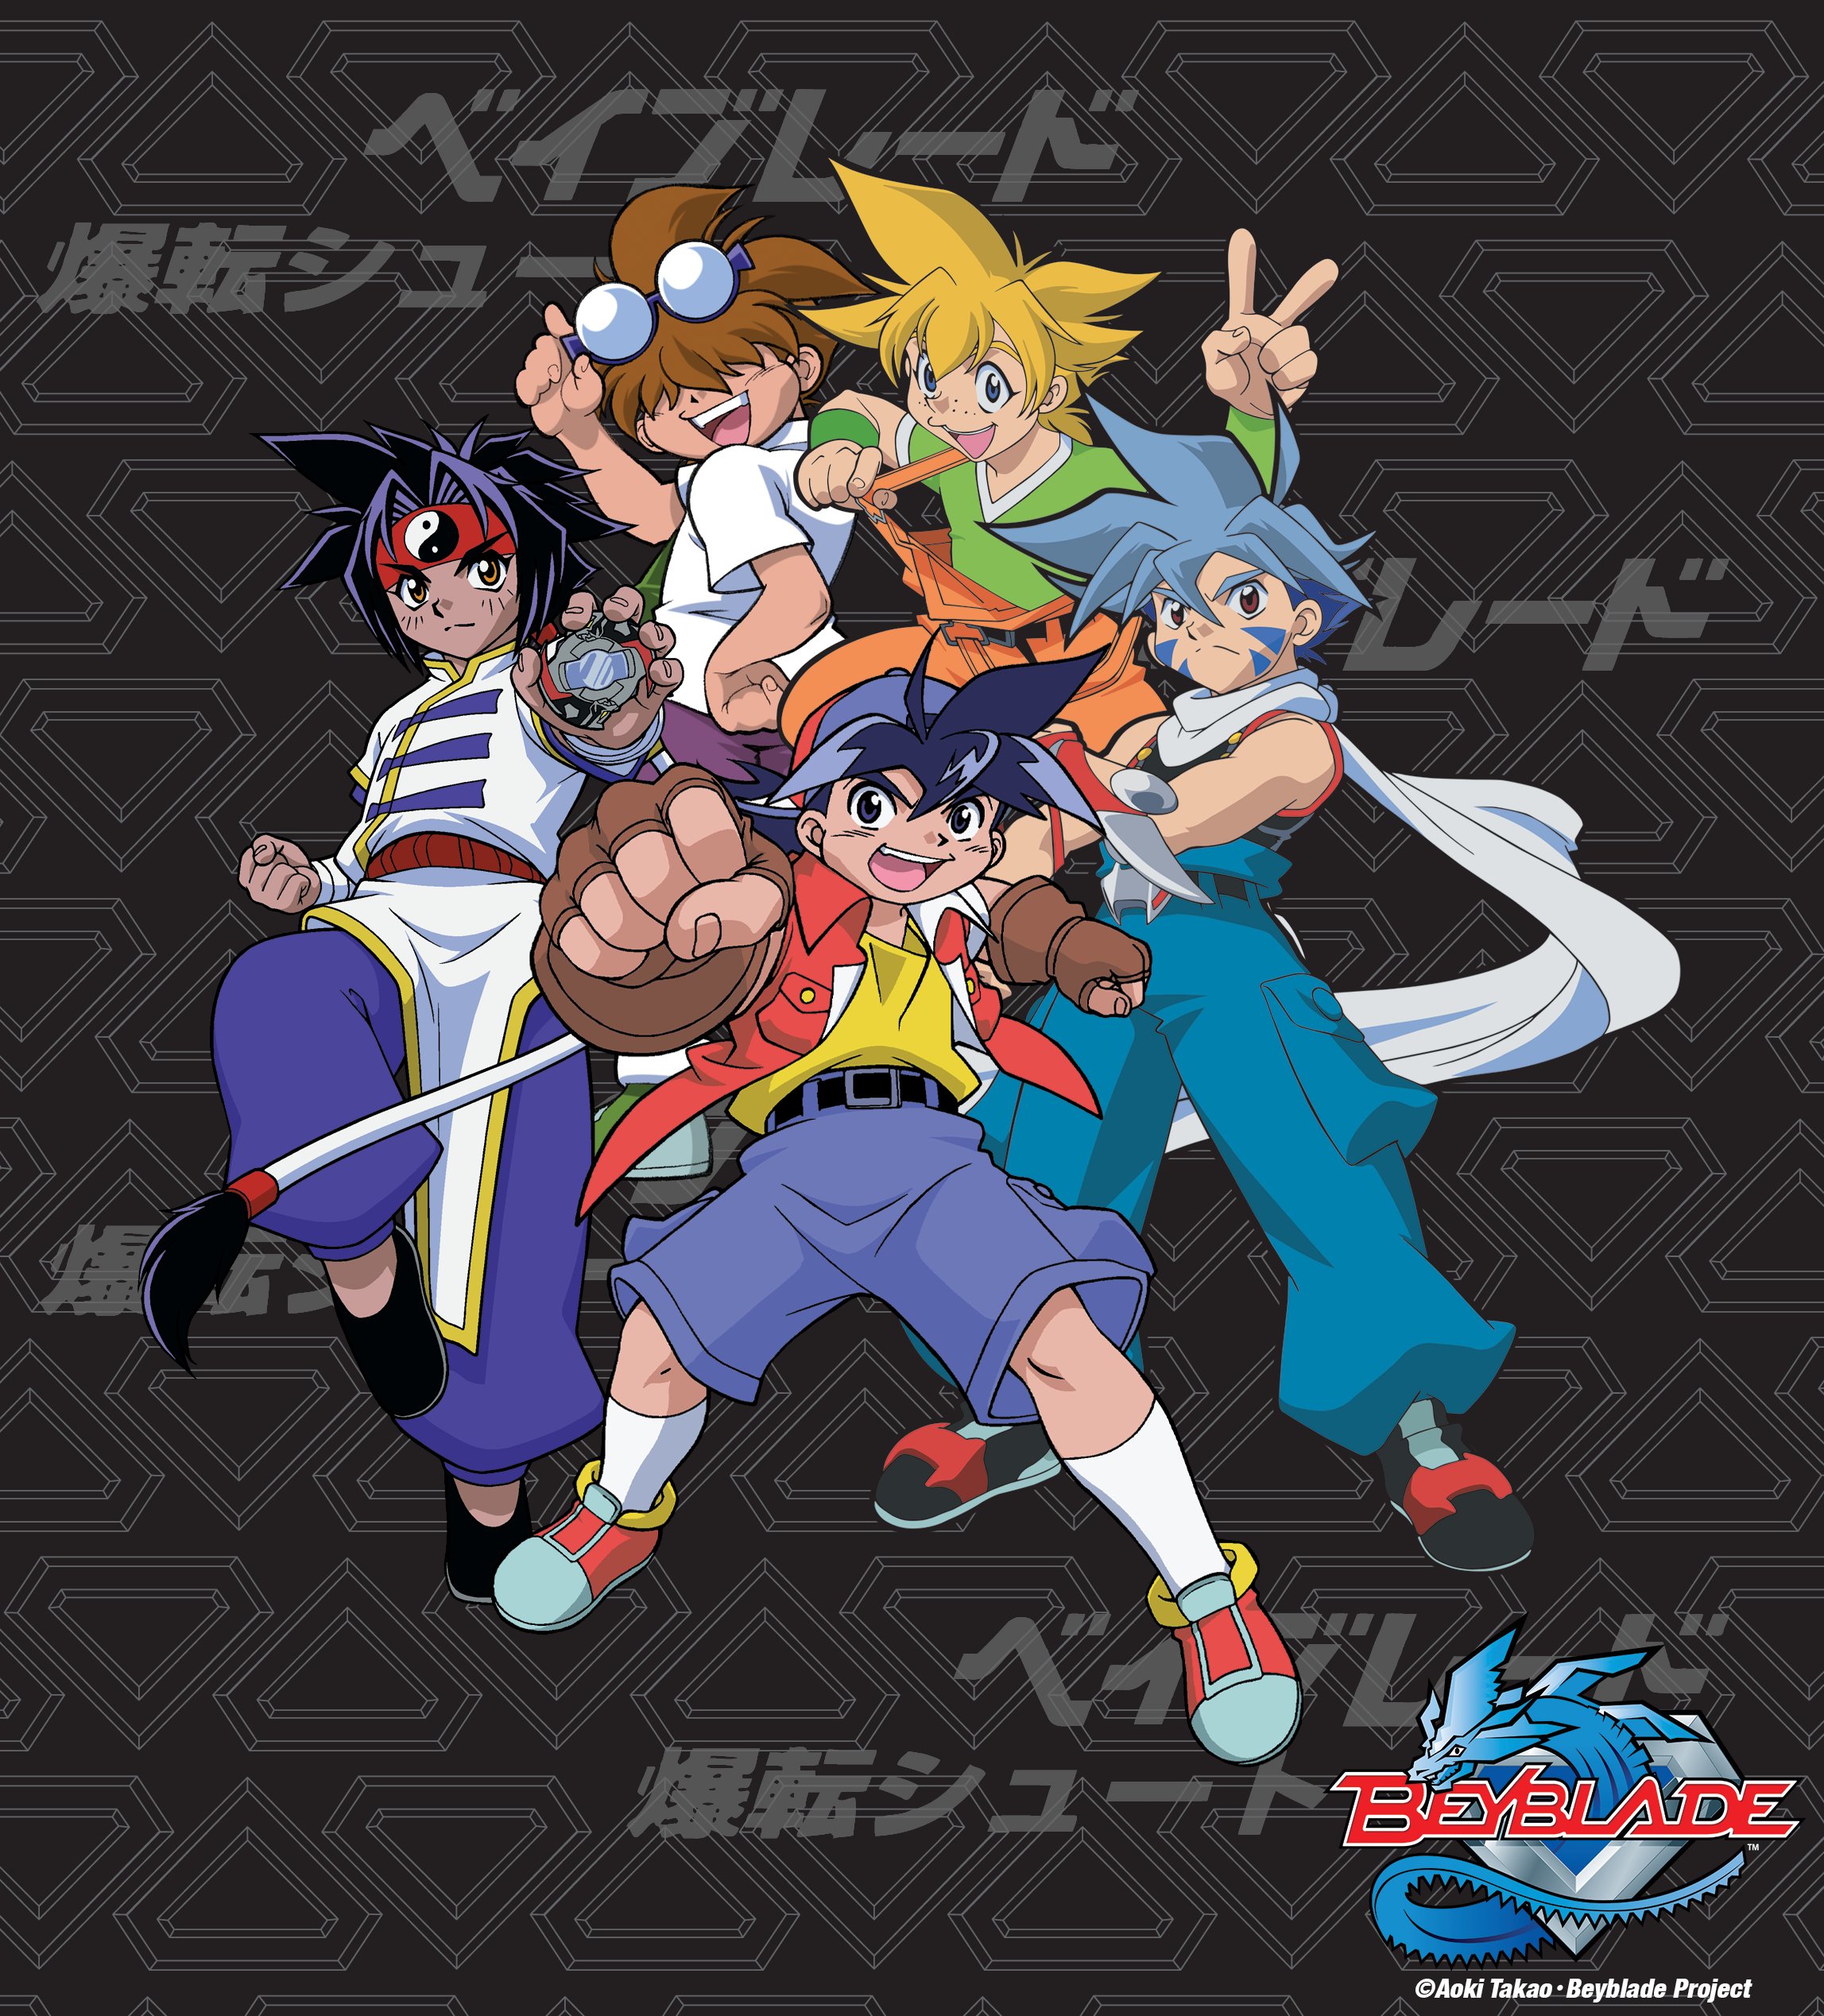 Beyblade Official on Twitter: "BEYBLADE GENERATION 1, Season 1 English and Latin American Spanish episodes will be available on BEYBLADE Official channel starting this Friday! Brazilian Portuguese episodes coming soon! Check